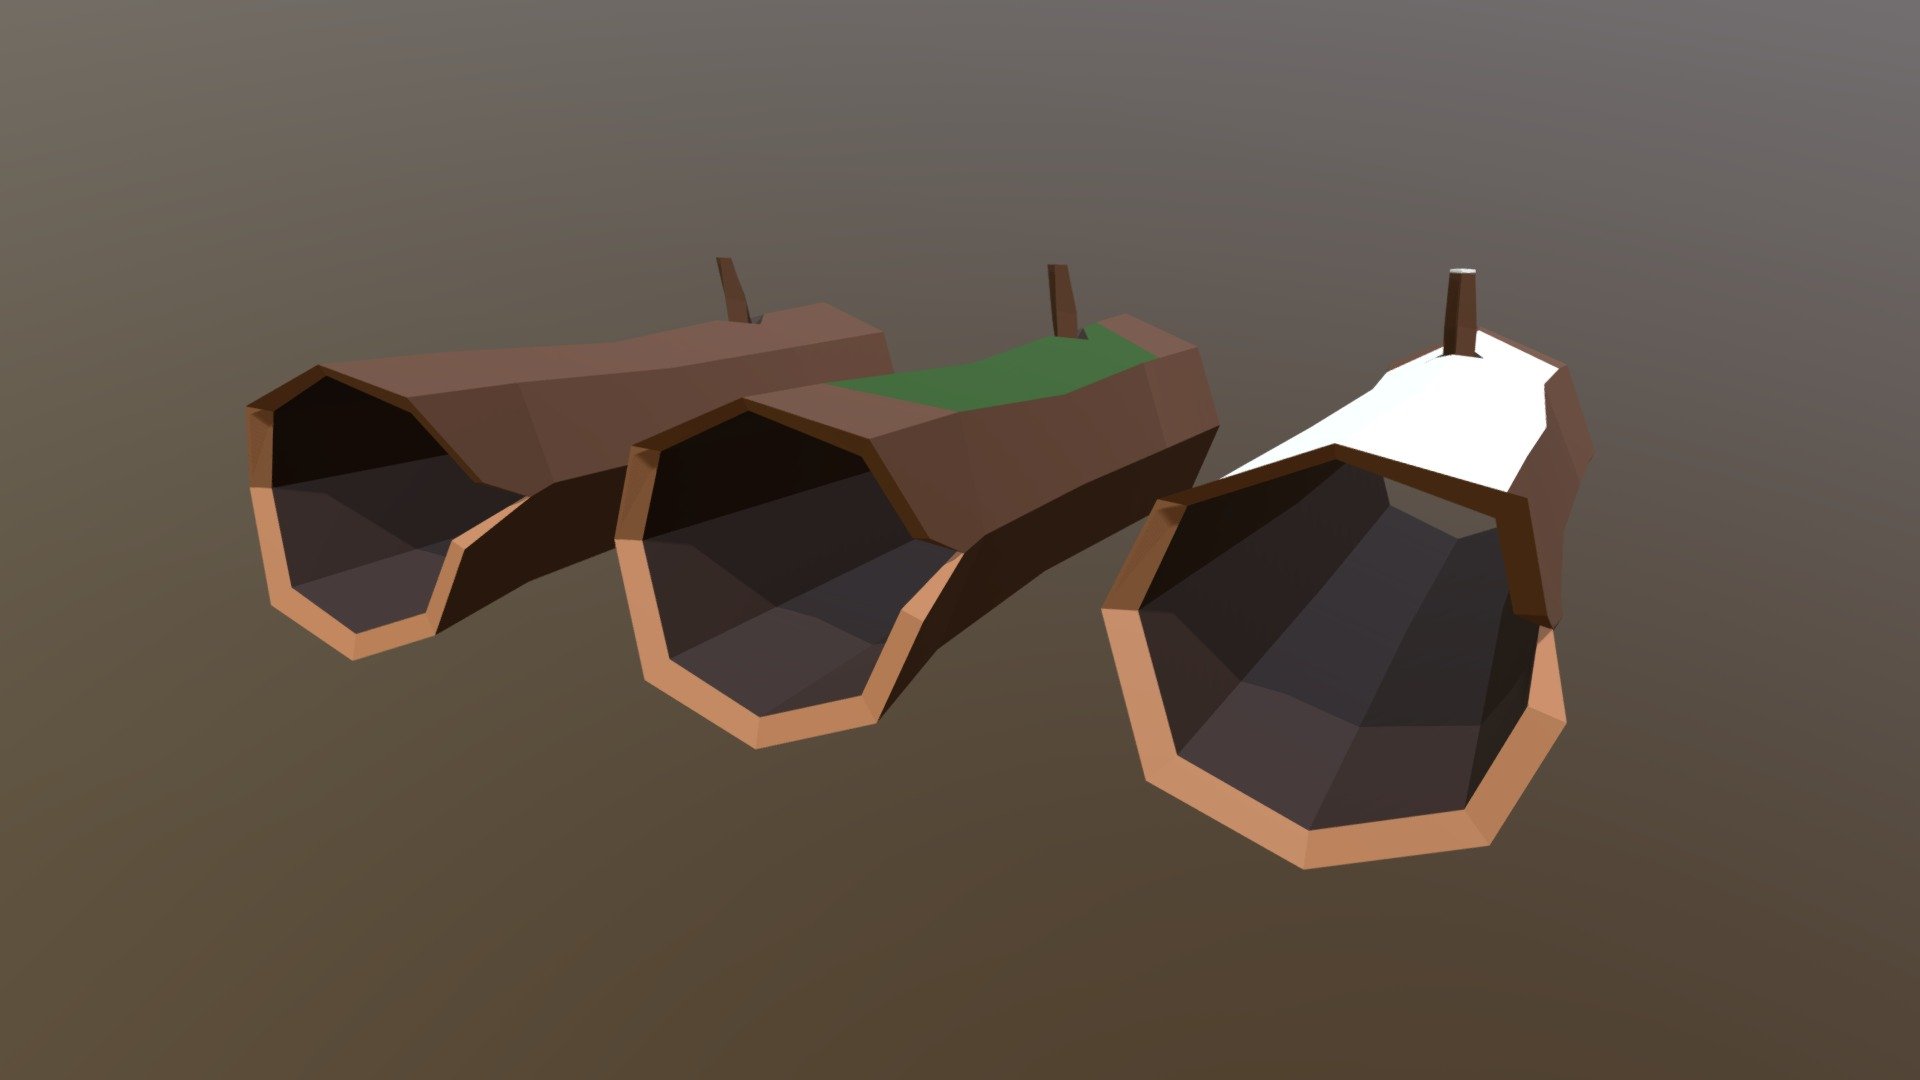 Here I created three different types of tree trunks in low poly style. Once with snow, moss and neutral 3d model